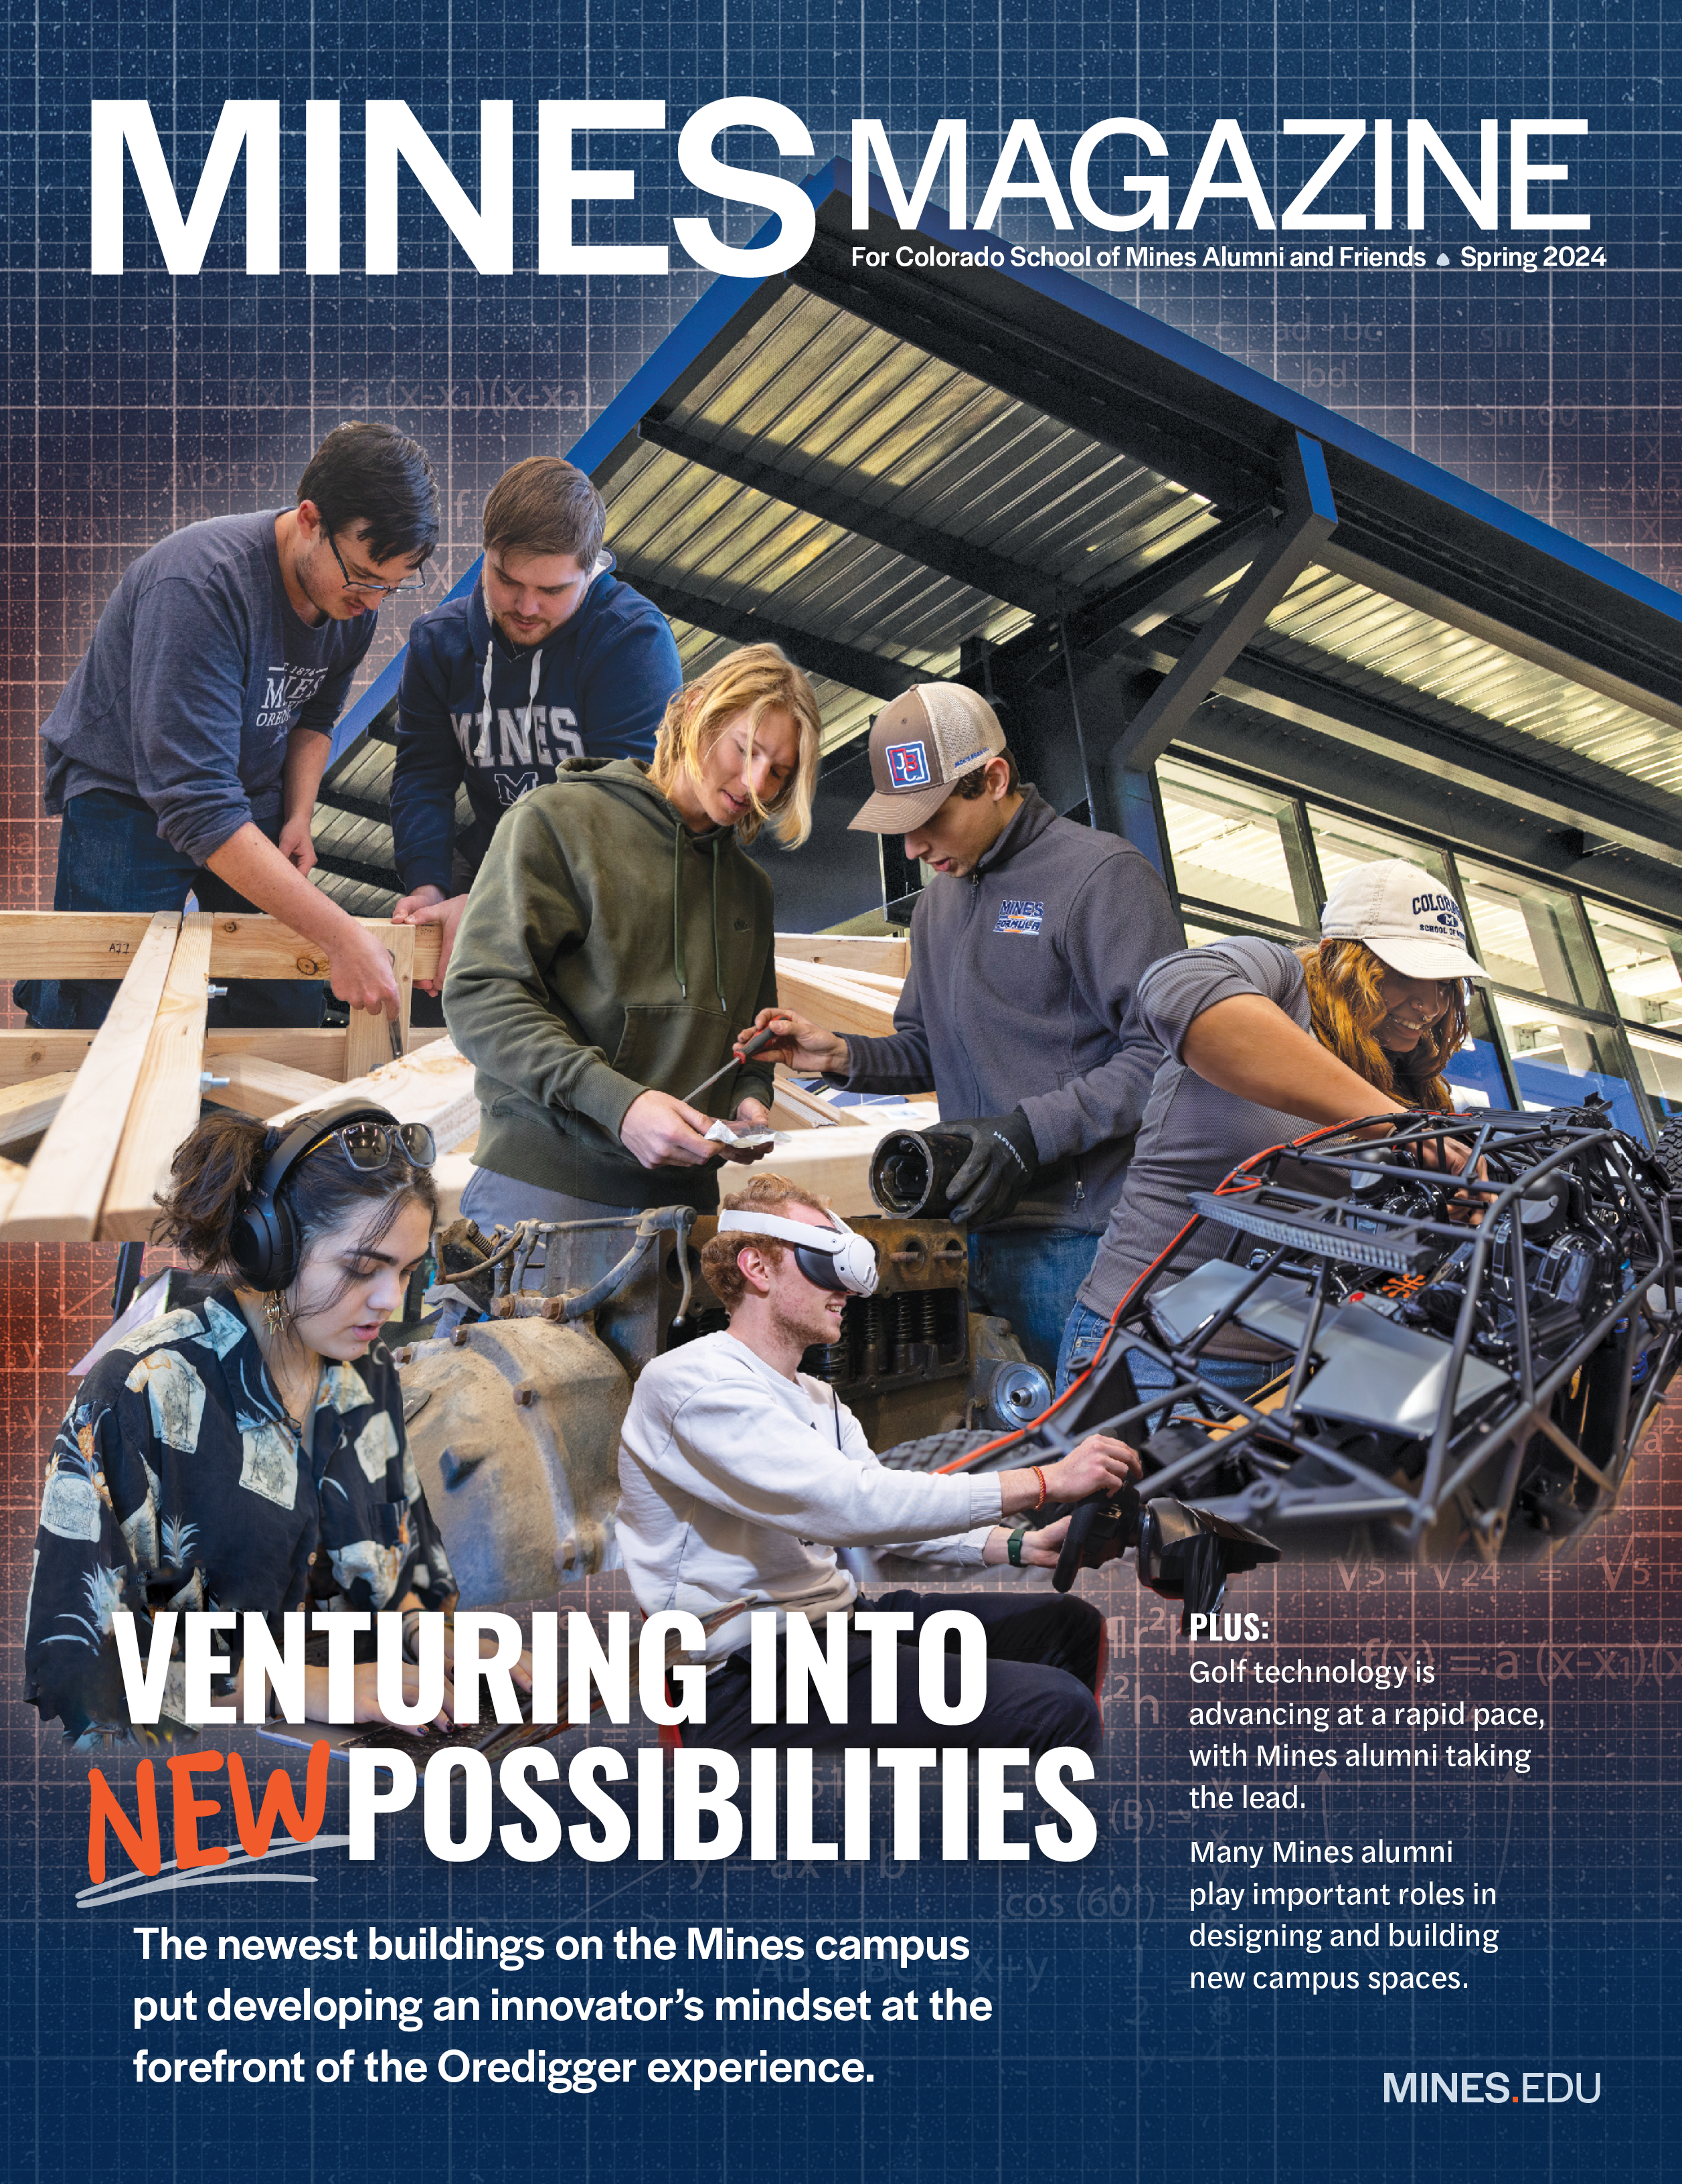 Mines Magazine spring 2024 cover depicting students working on various projects